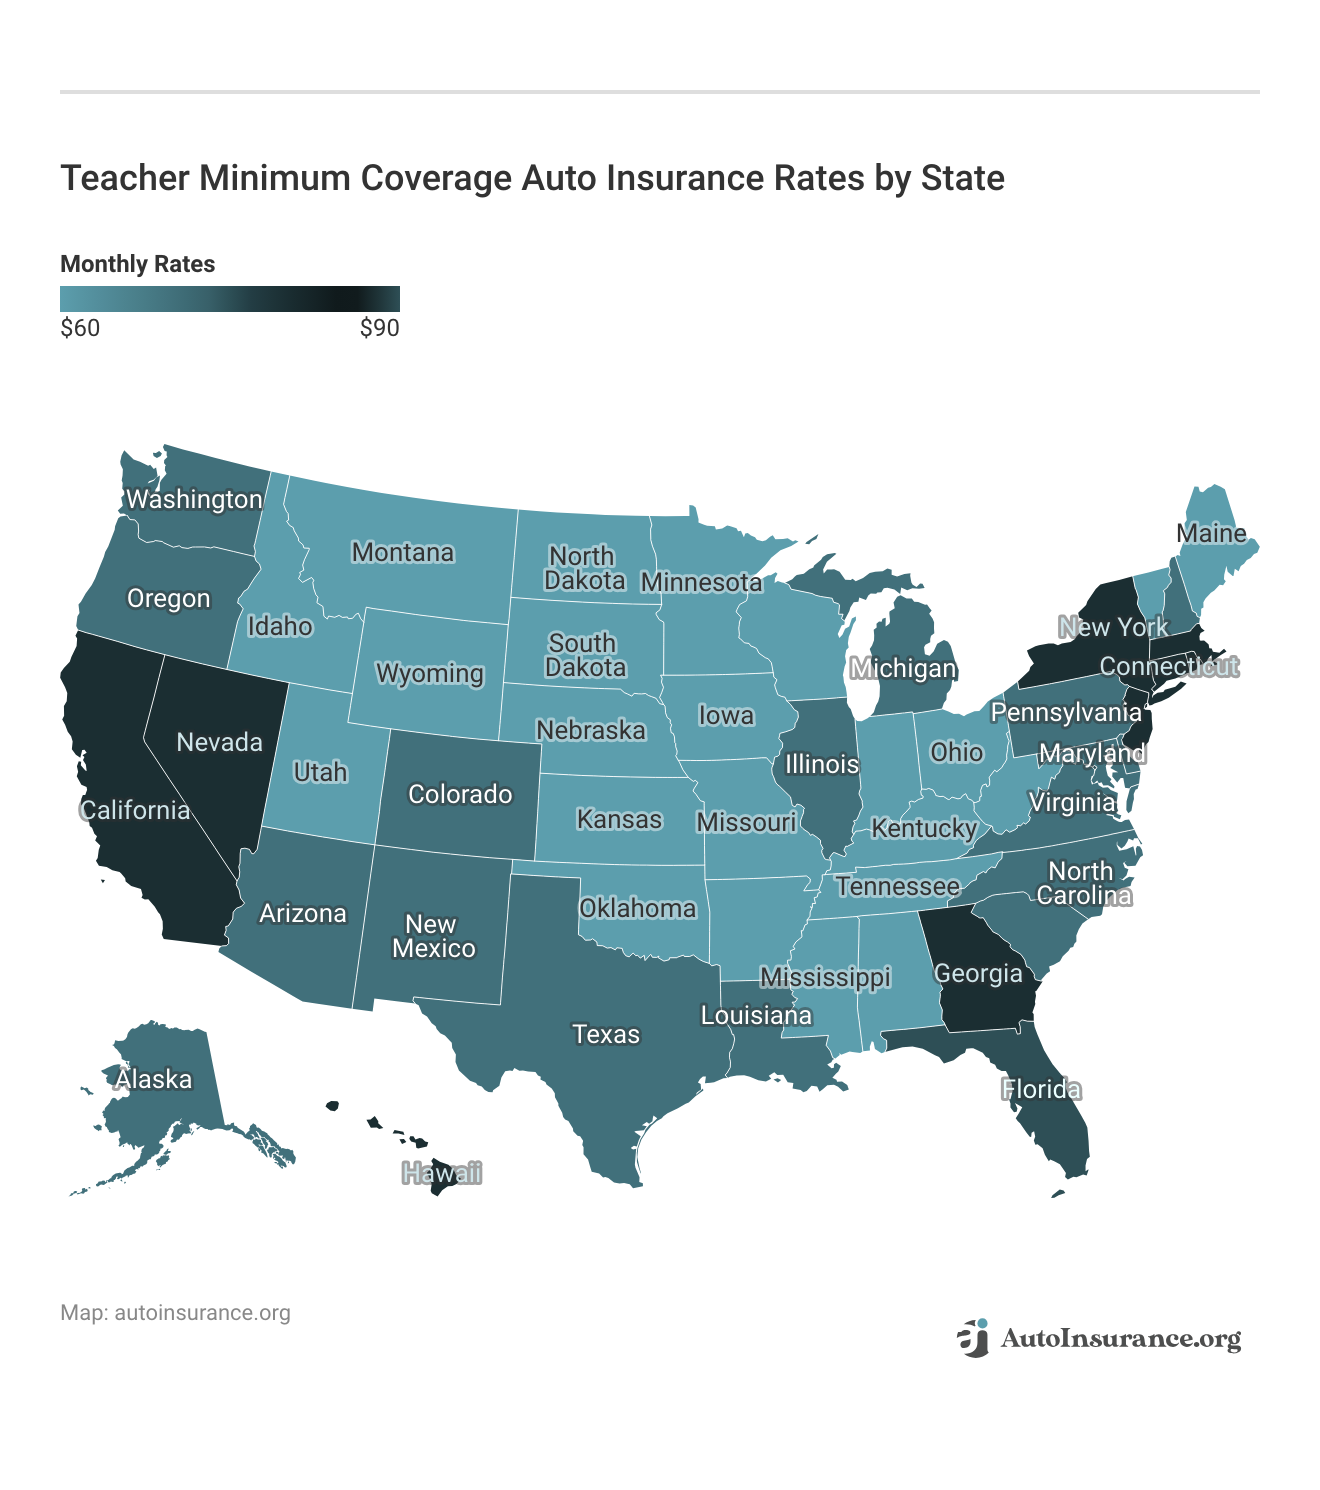 <h3>Teacher Minimum Coverage Auto Insurance Rates by State</h3>